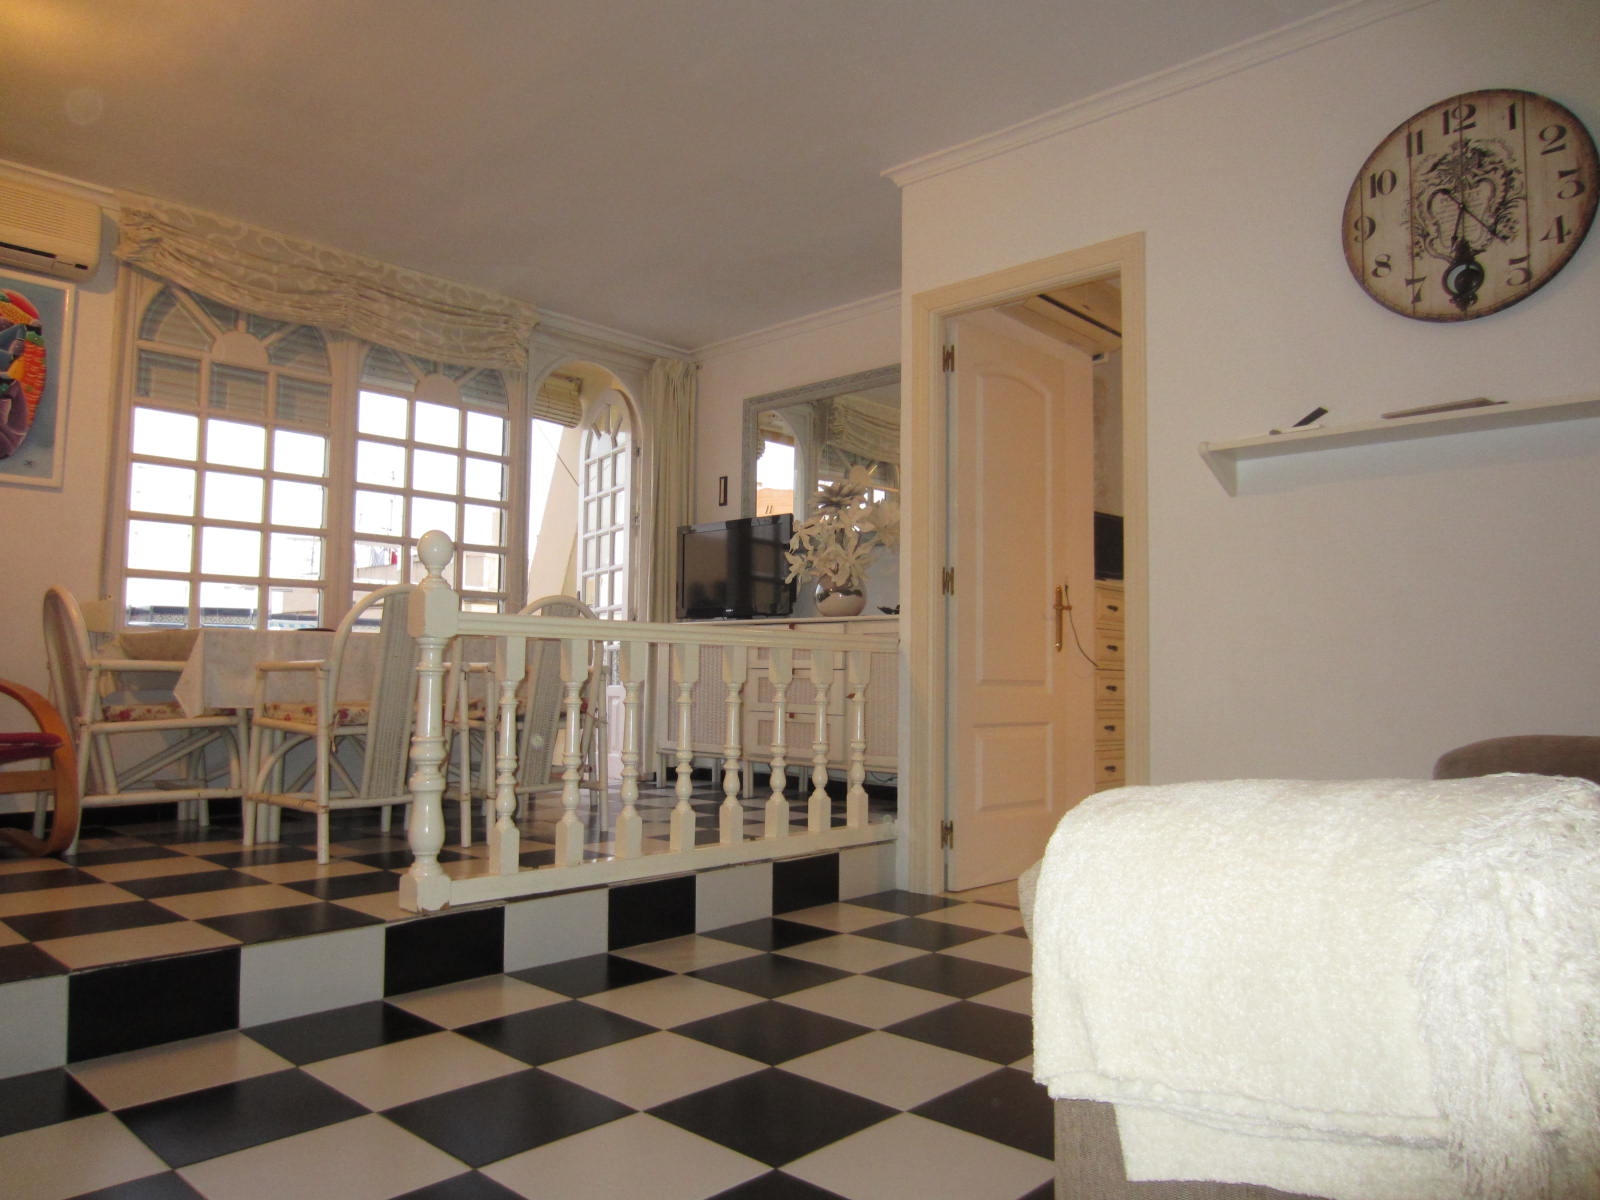 Penthouse for rent in Fuengirola